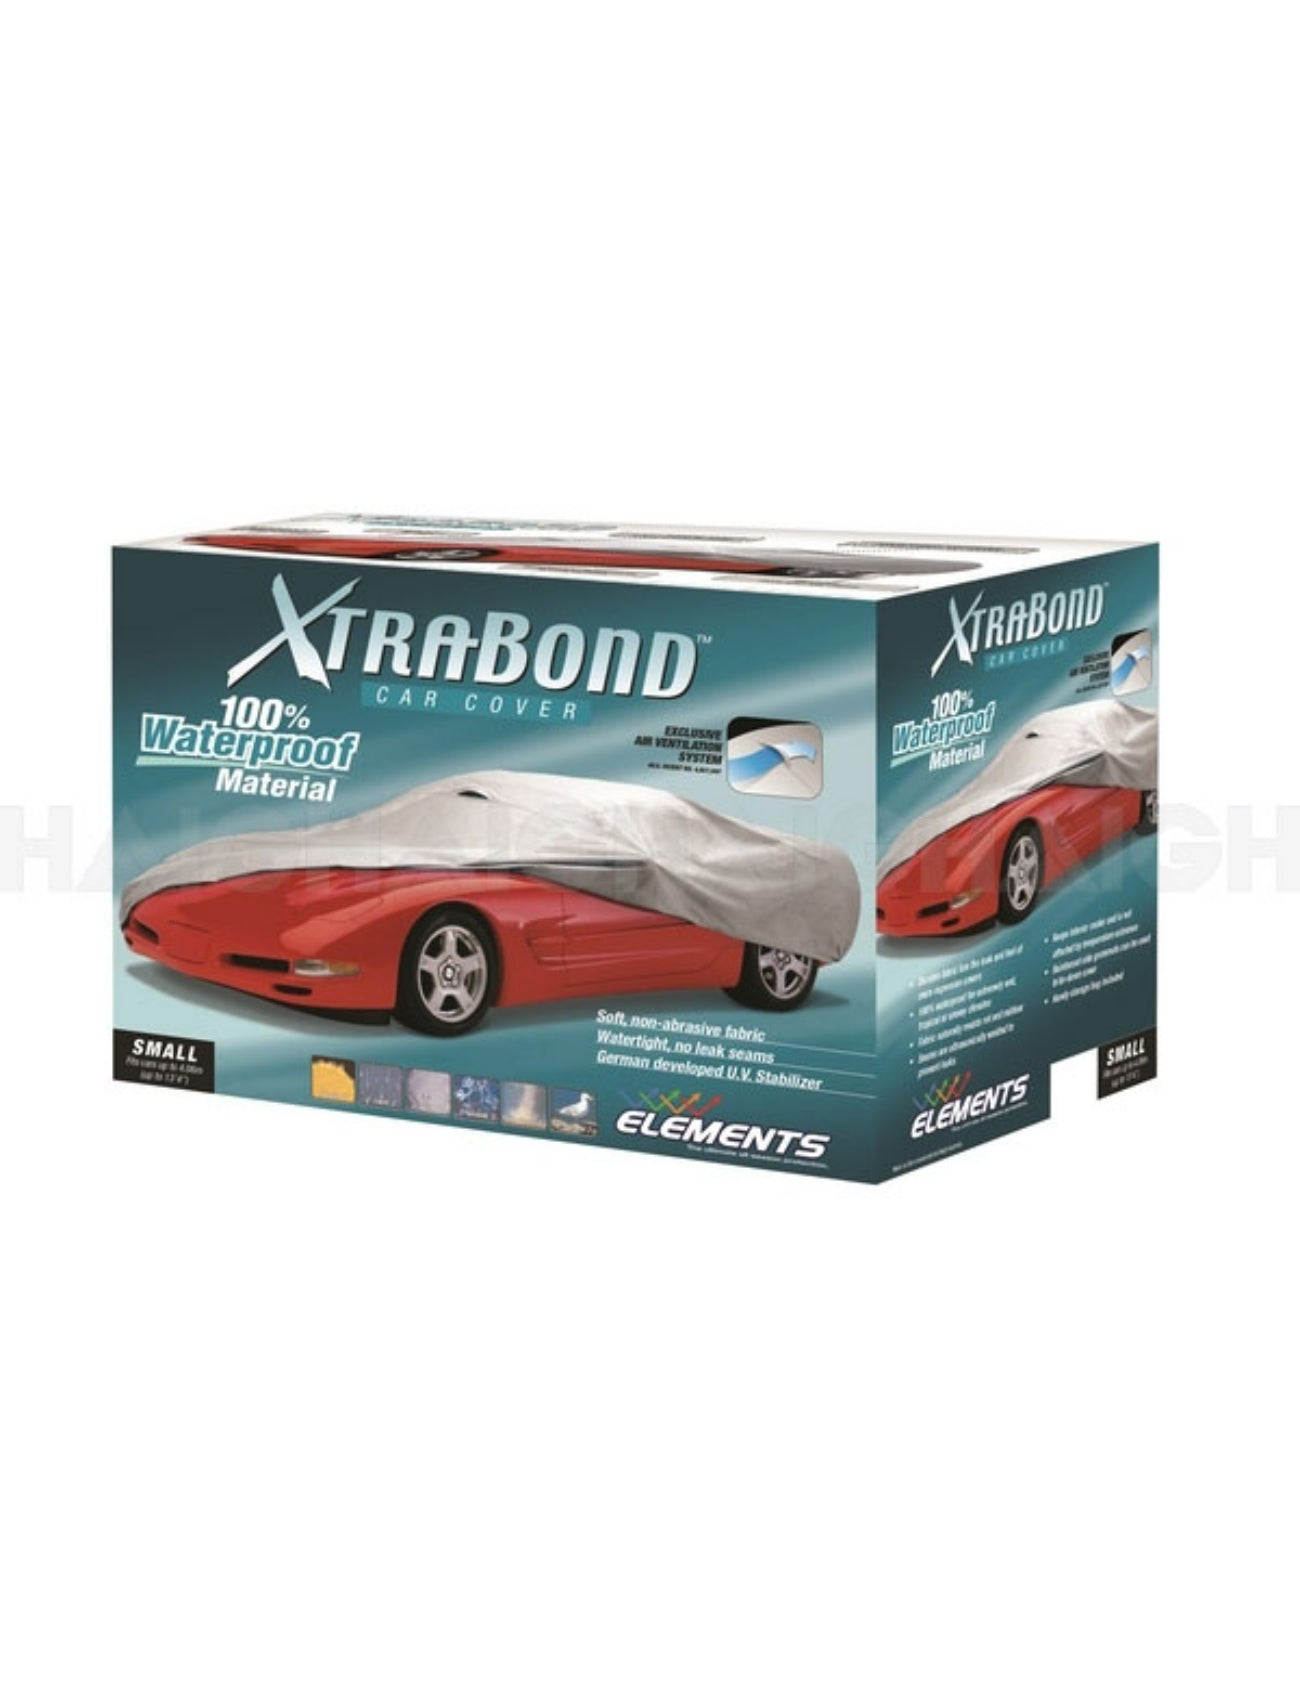 XTRABOND WATERPROOF CAR COVER SMALL